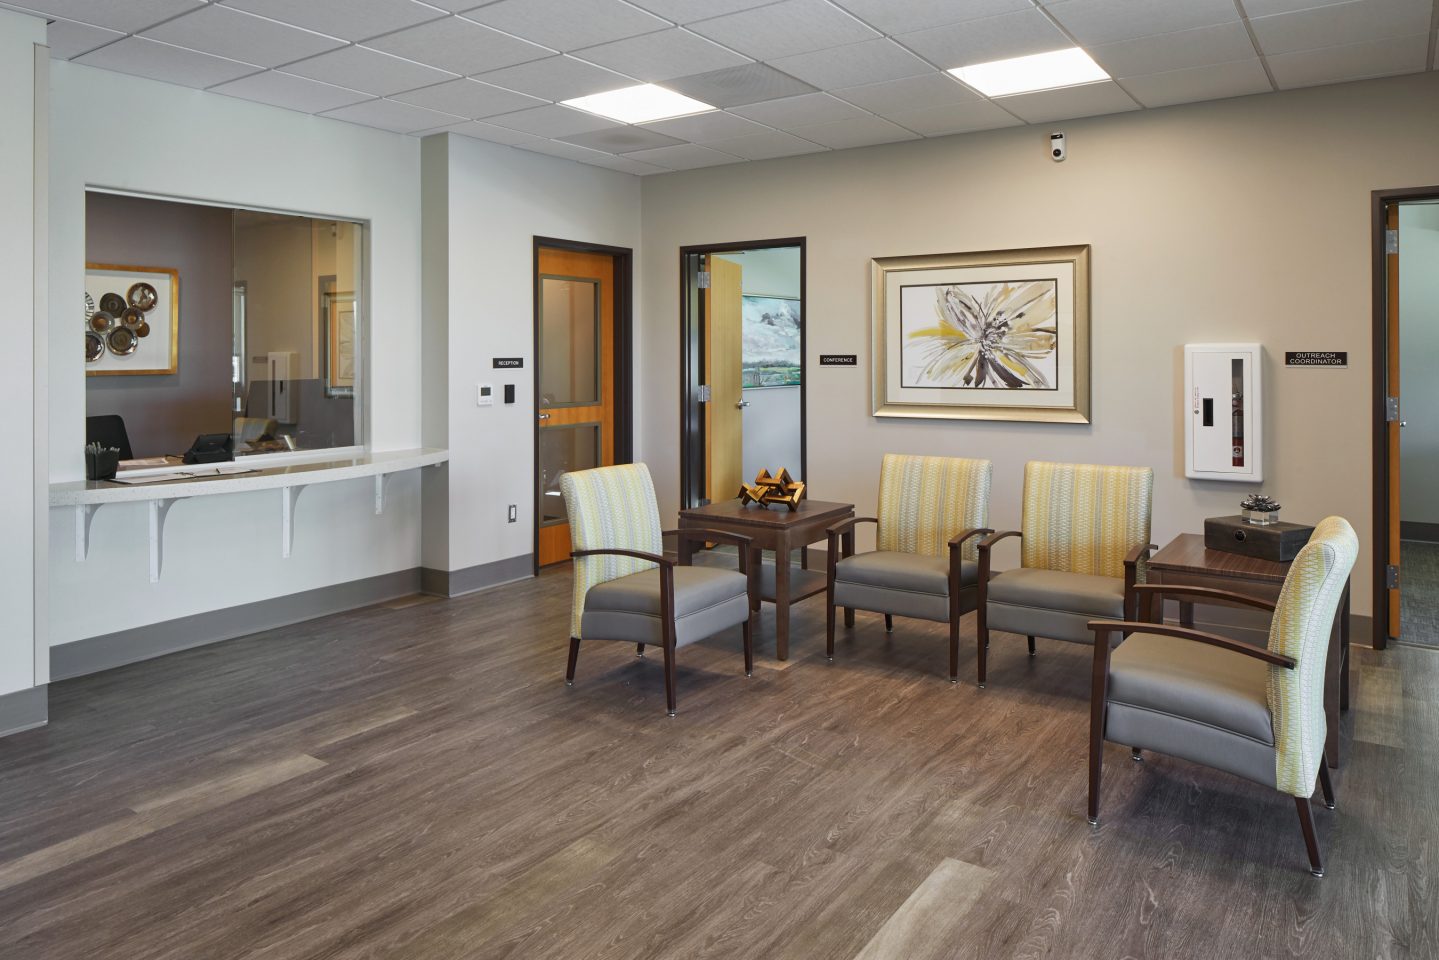 The Reception Area Has A Sunny Seating Area For Residents While They Wait For Their Appointments.